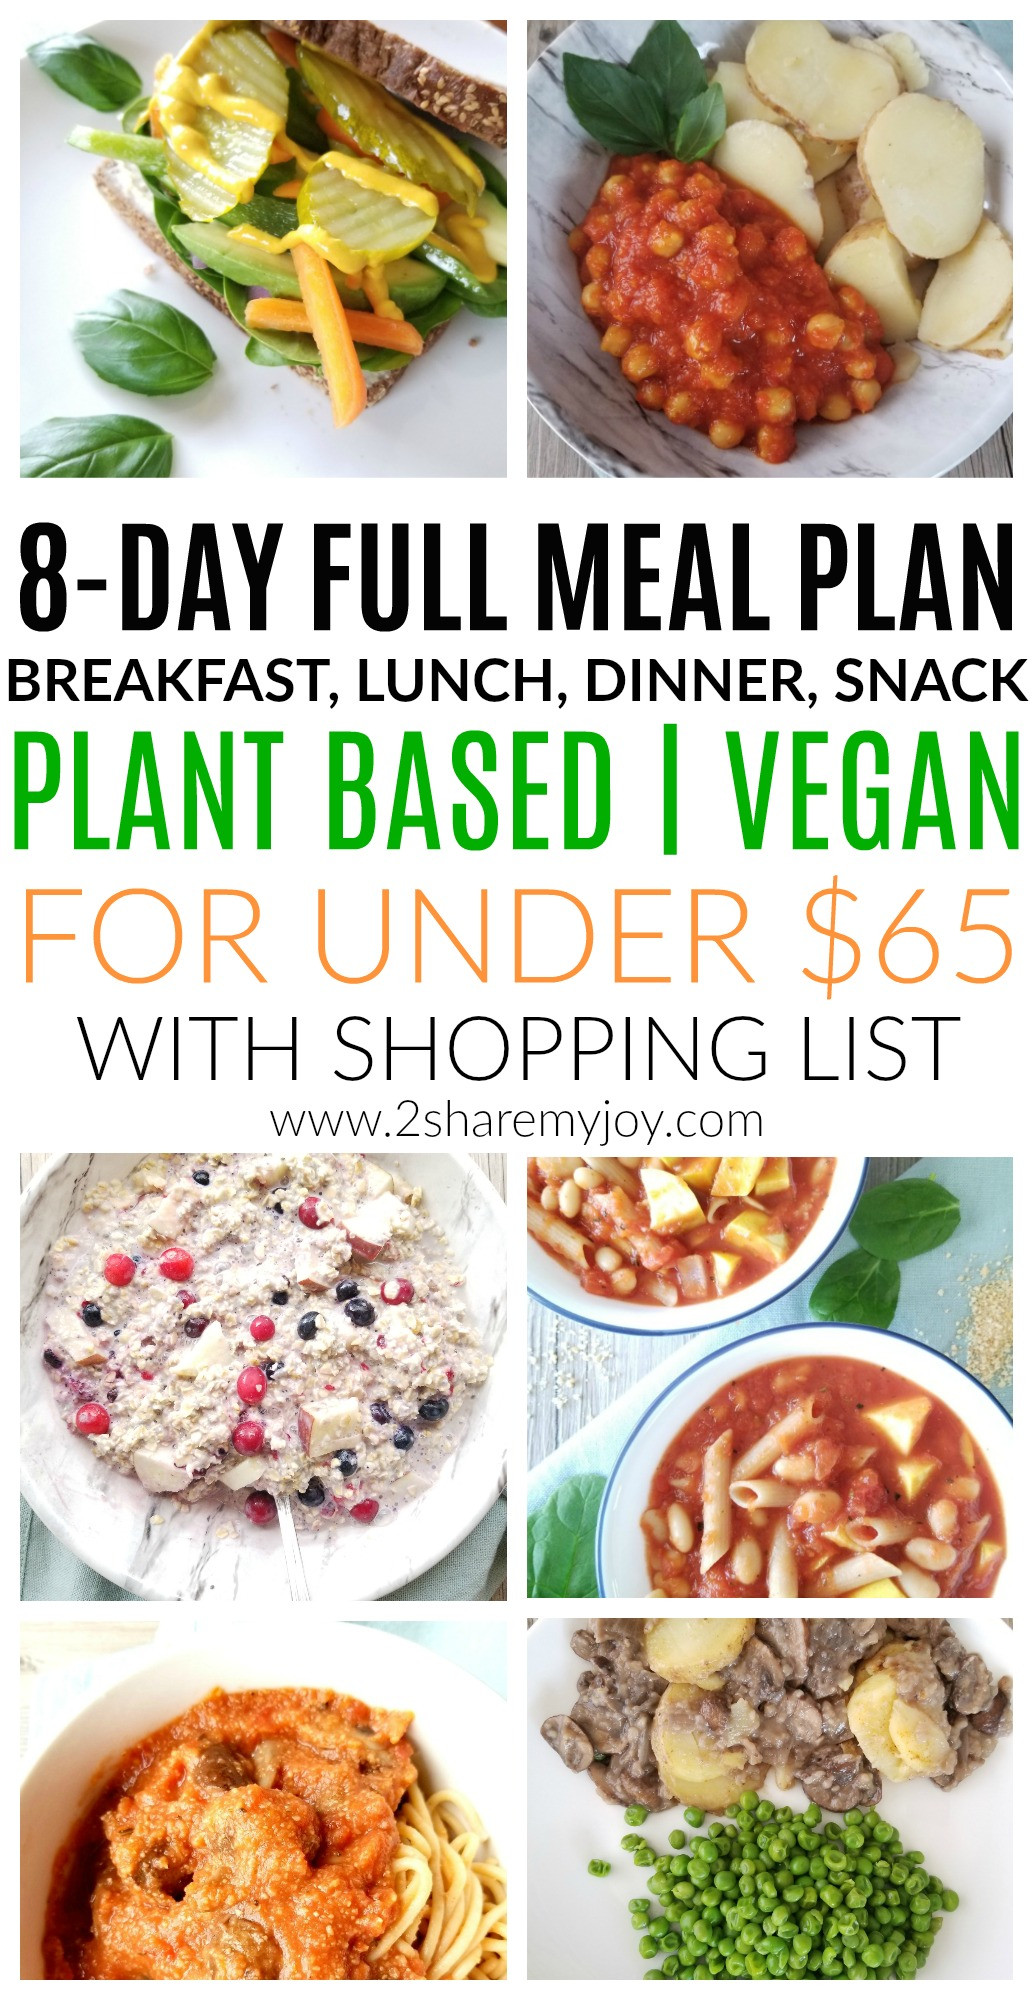 Plant Based Diet For Beginners On A Budget
 8 Day Plant Based Meal Plan on A Bud 2 MyJoy